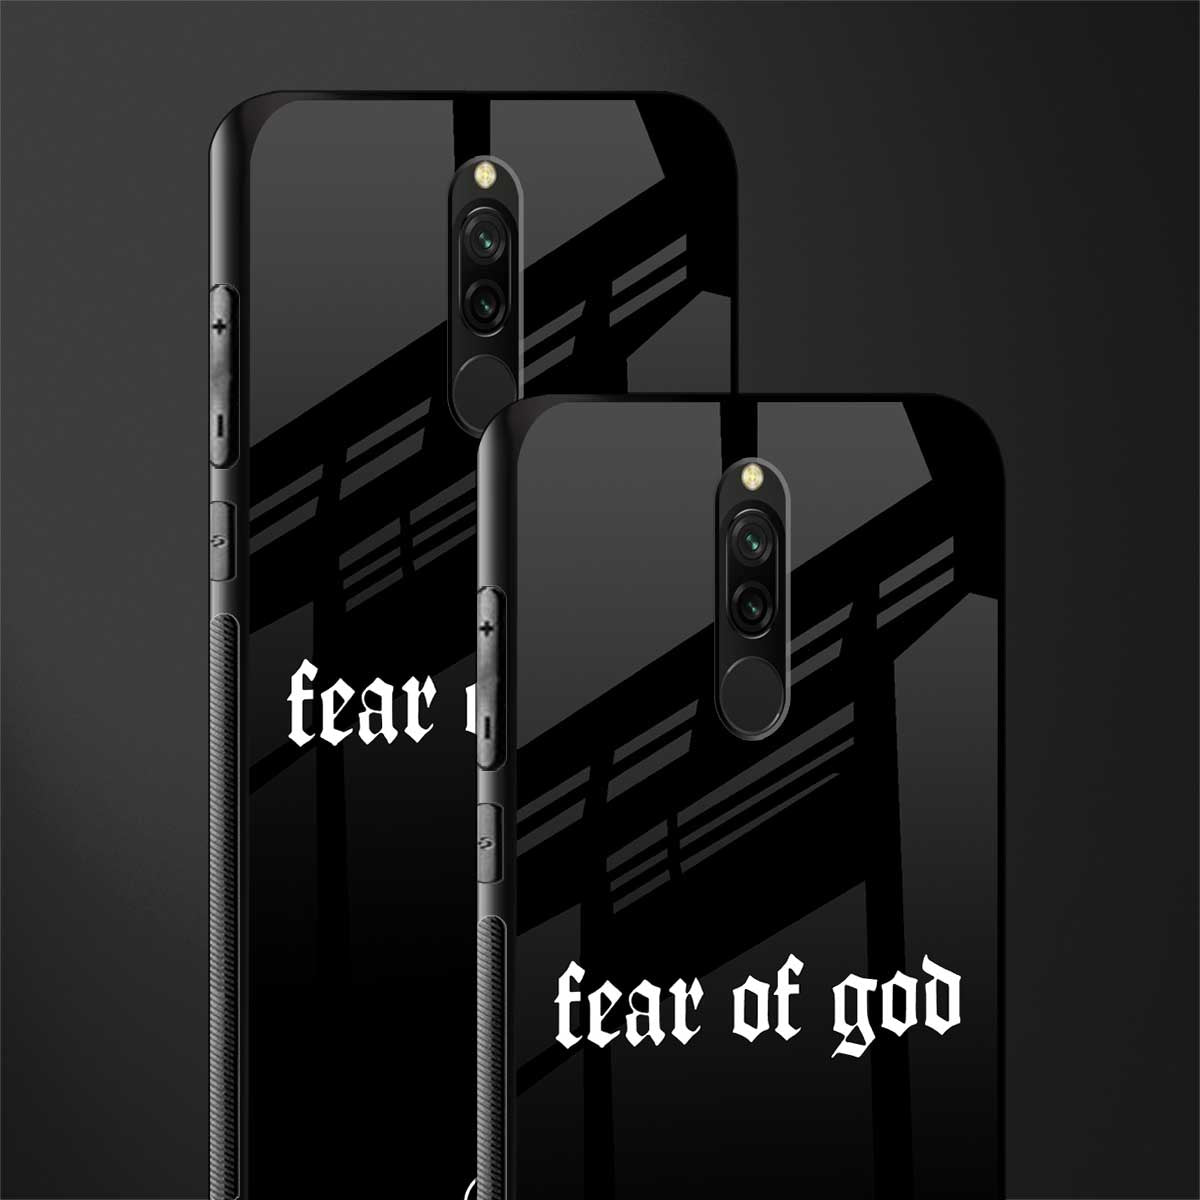 fear of god phone cover for redmi 8